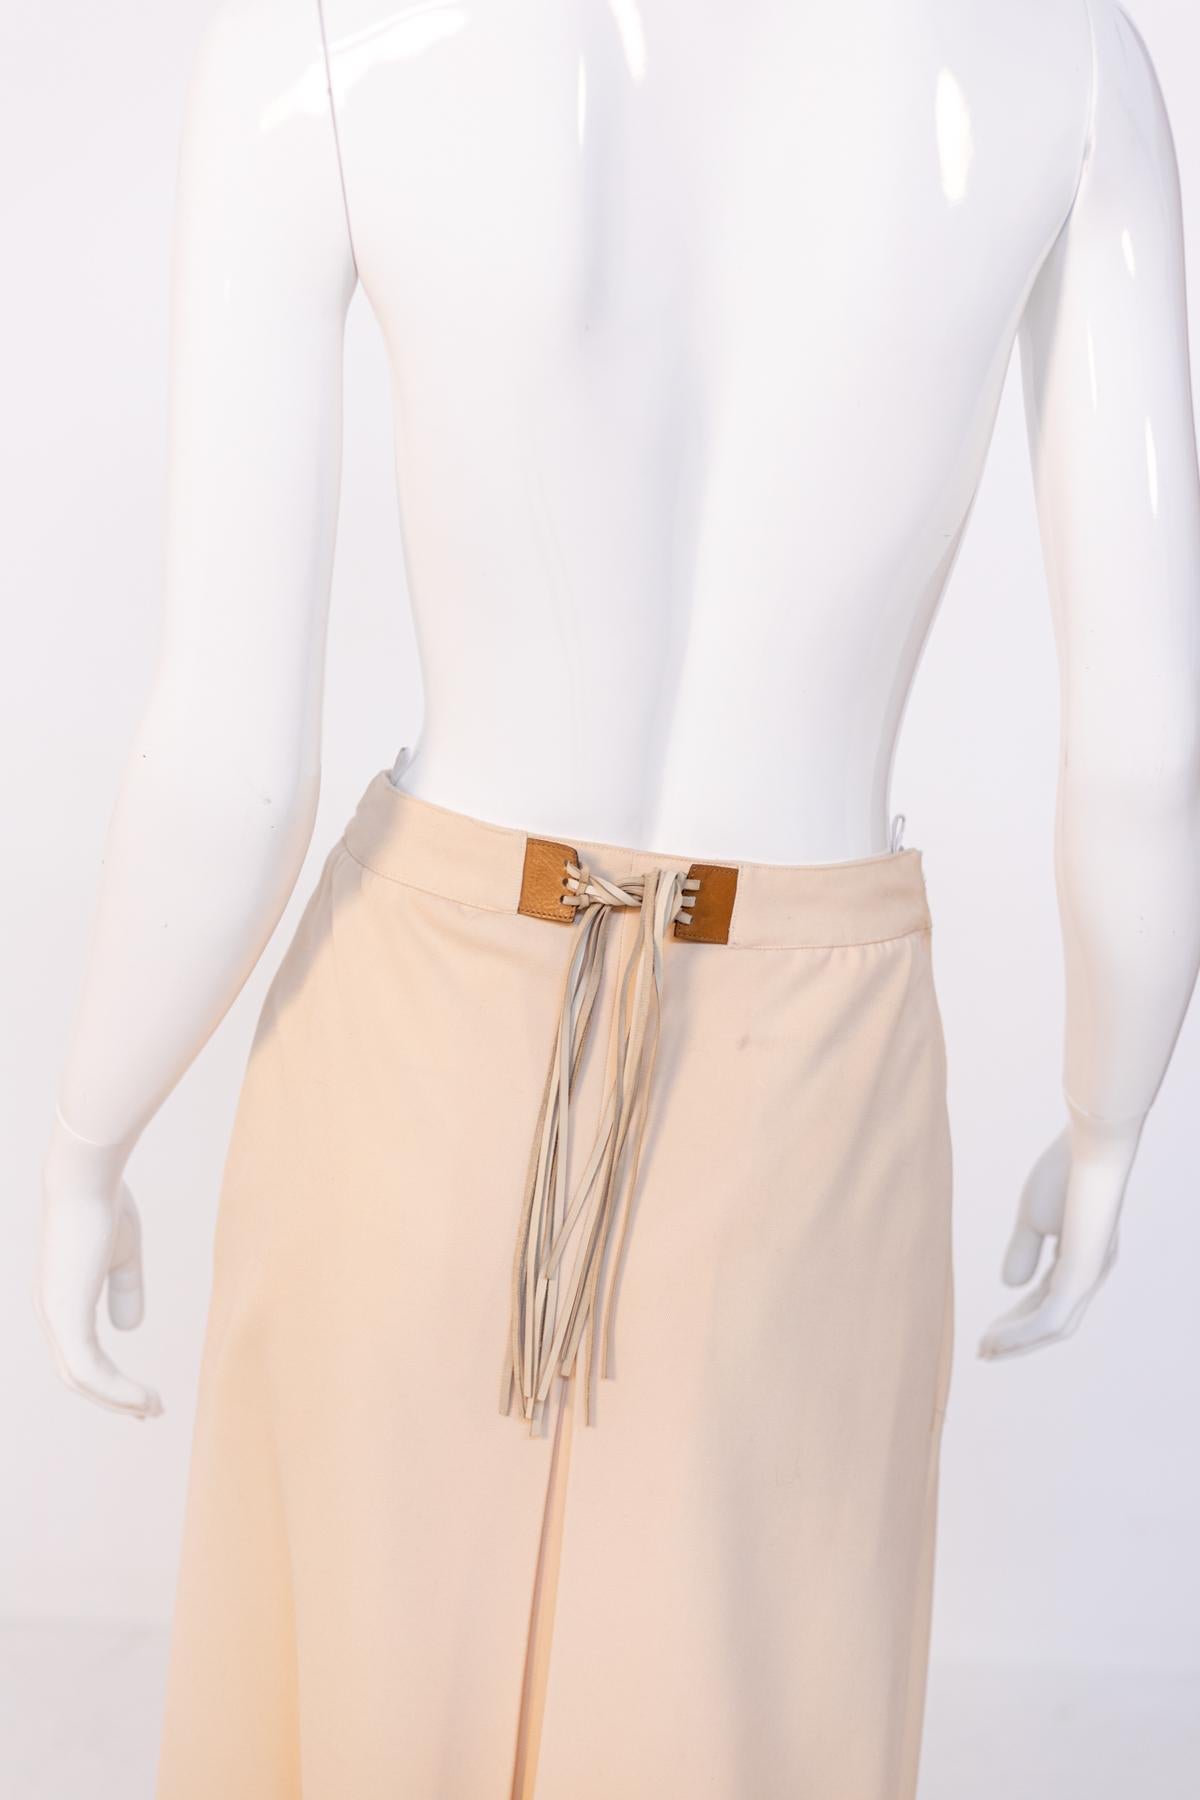 Women's Vintage Skirt with Leather Belt For Sale